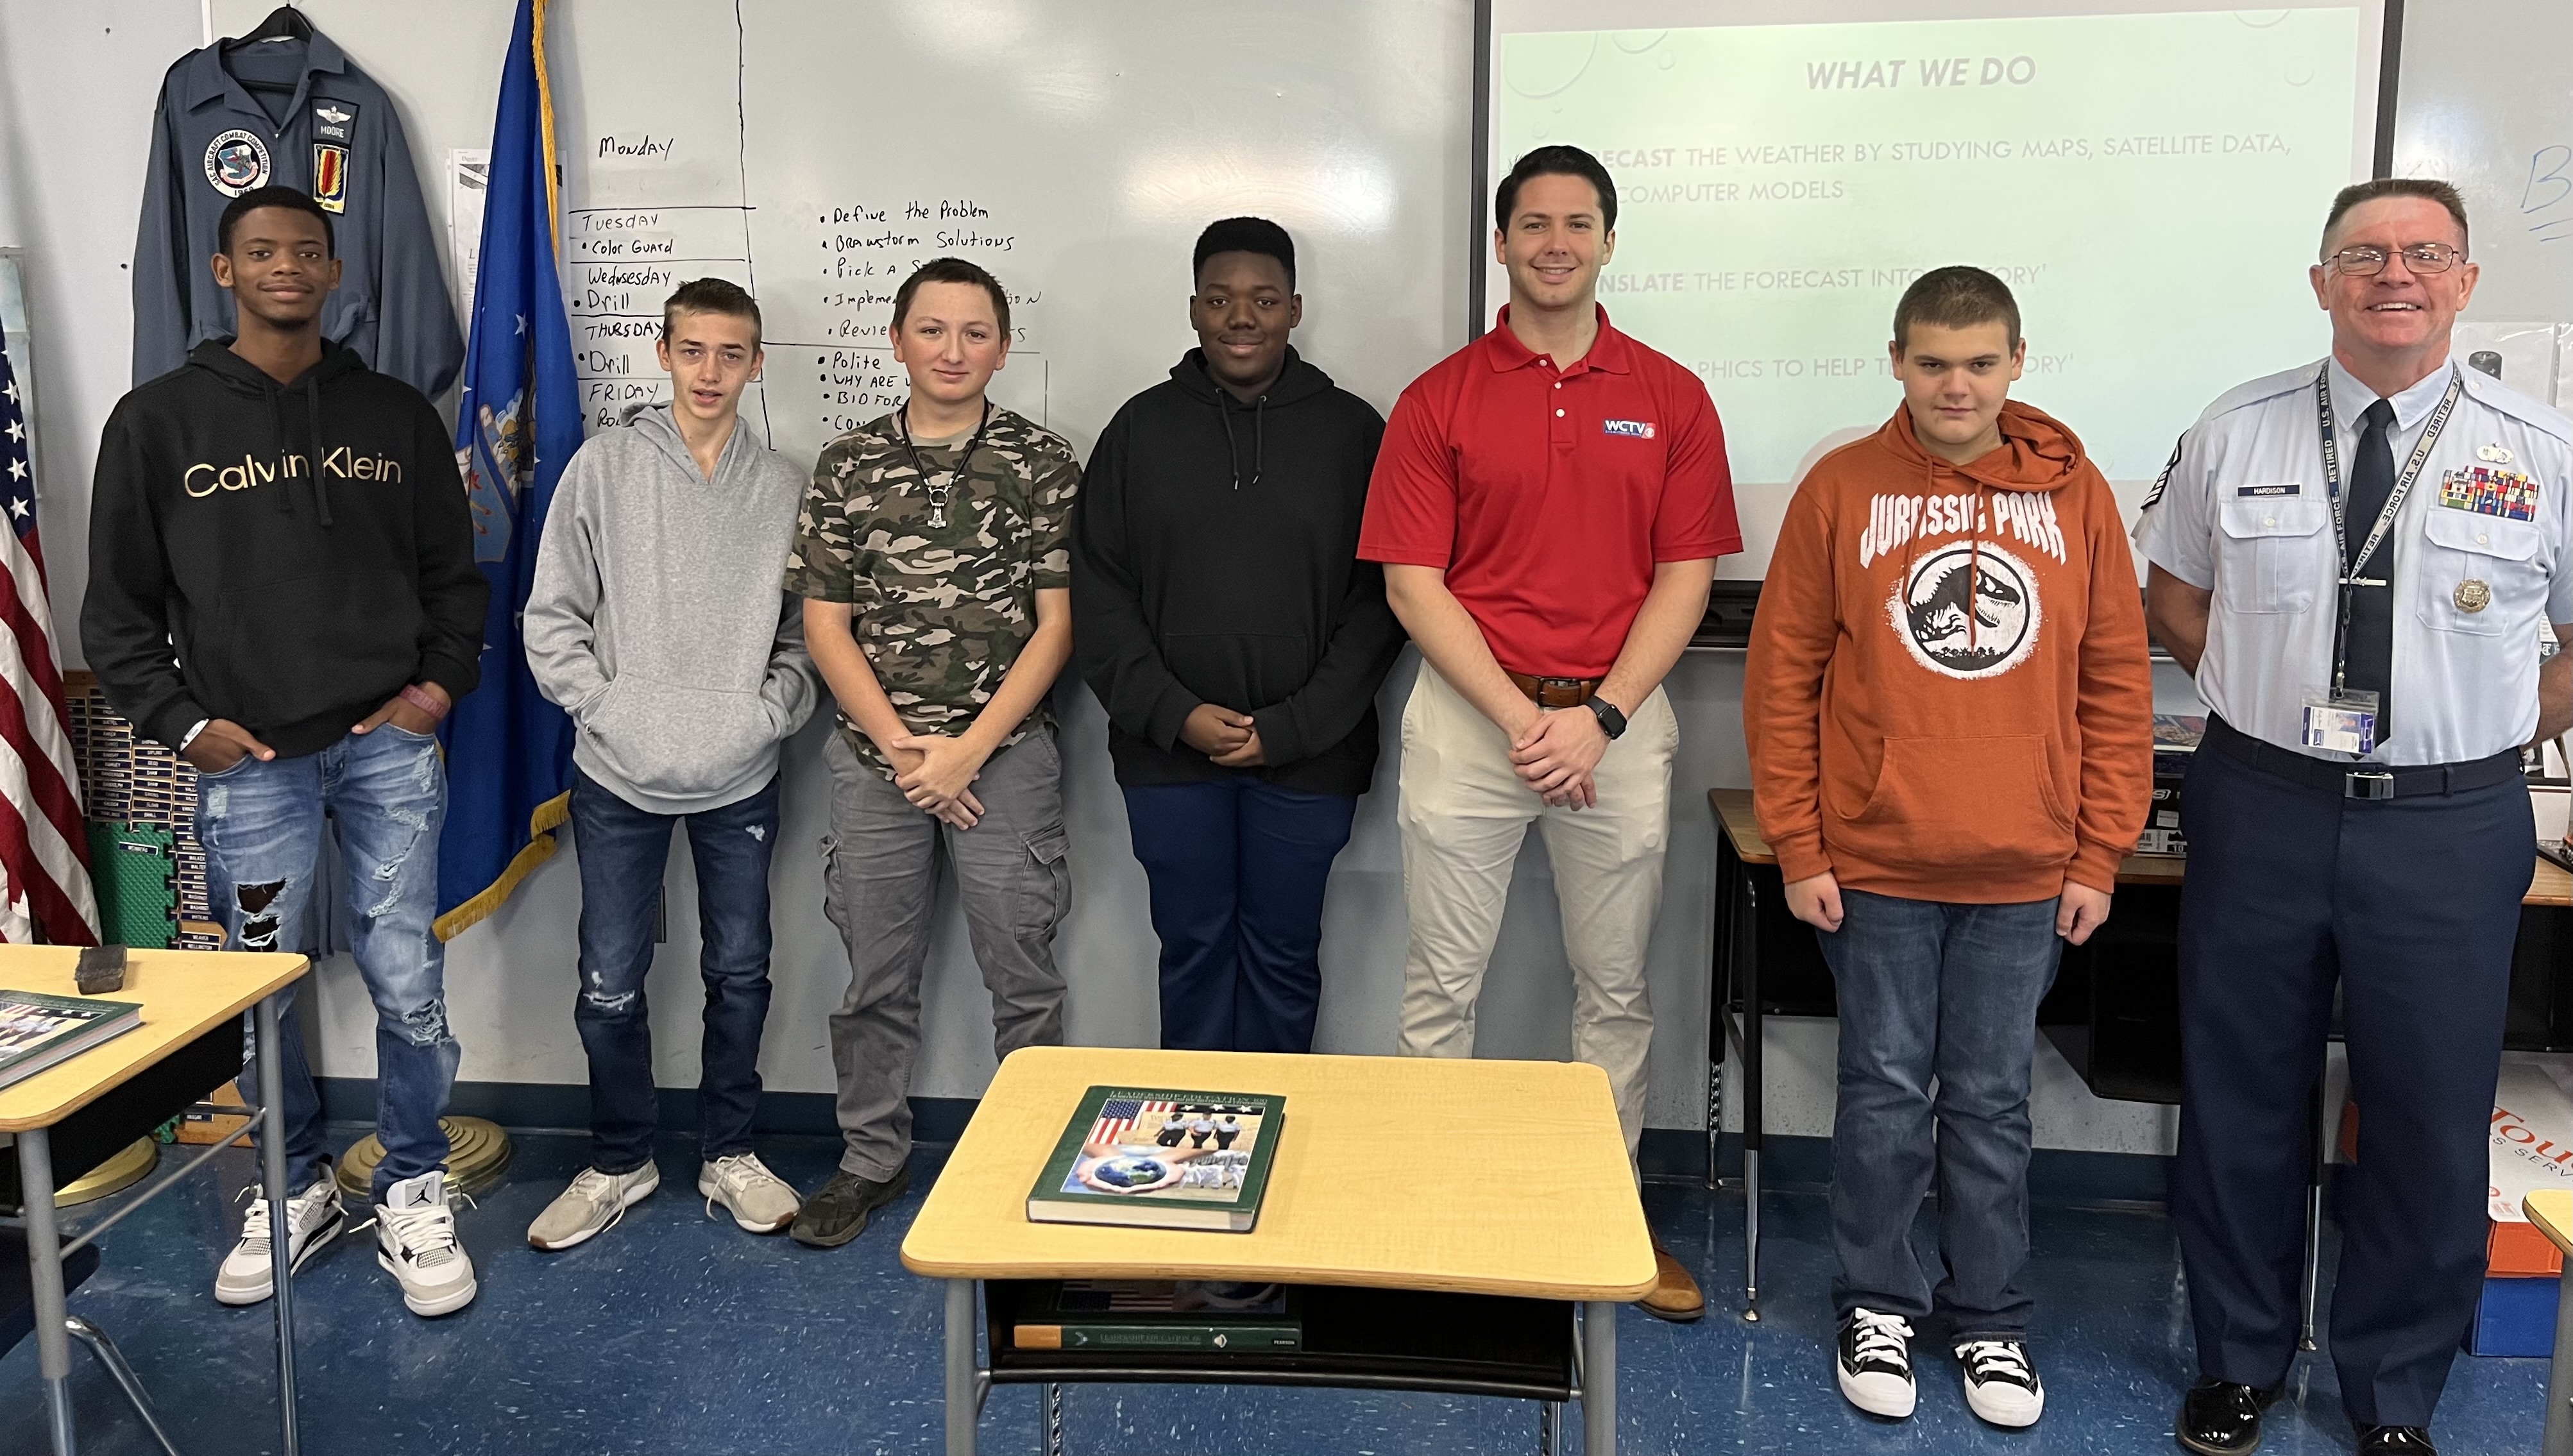 Students and Sgt. Hardison pose with meteorologist